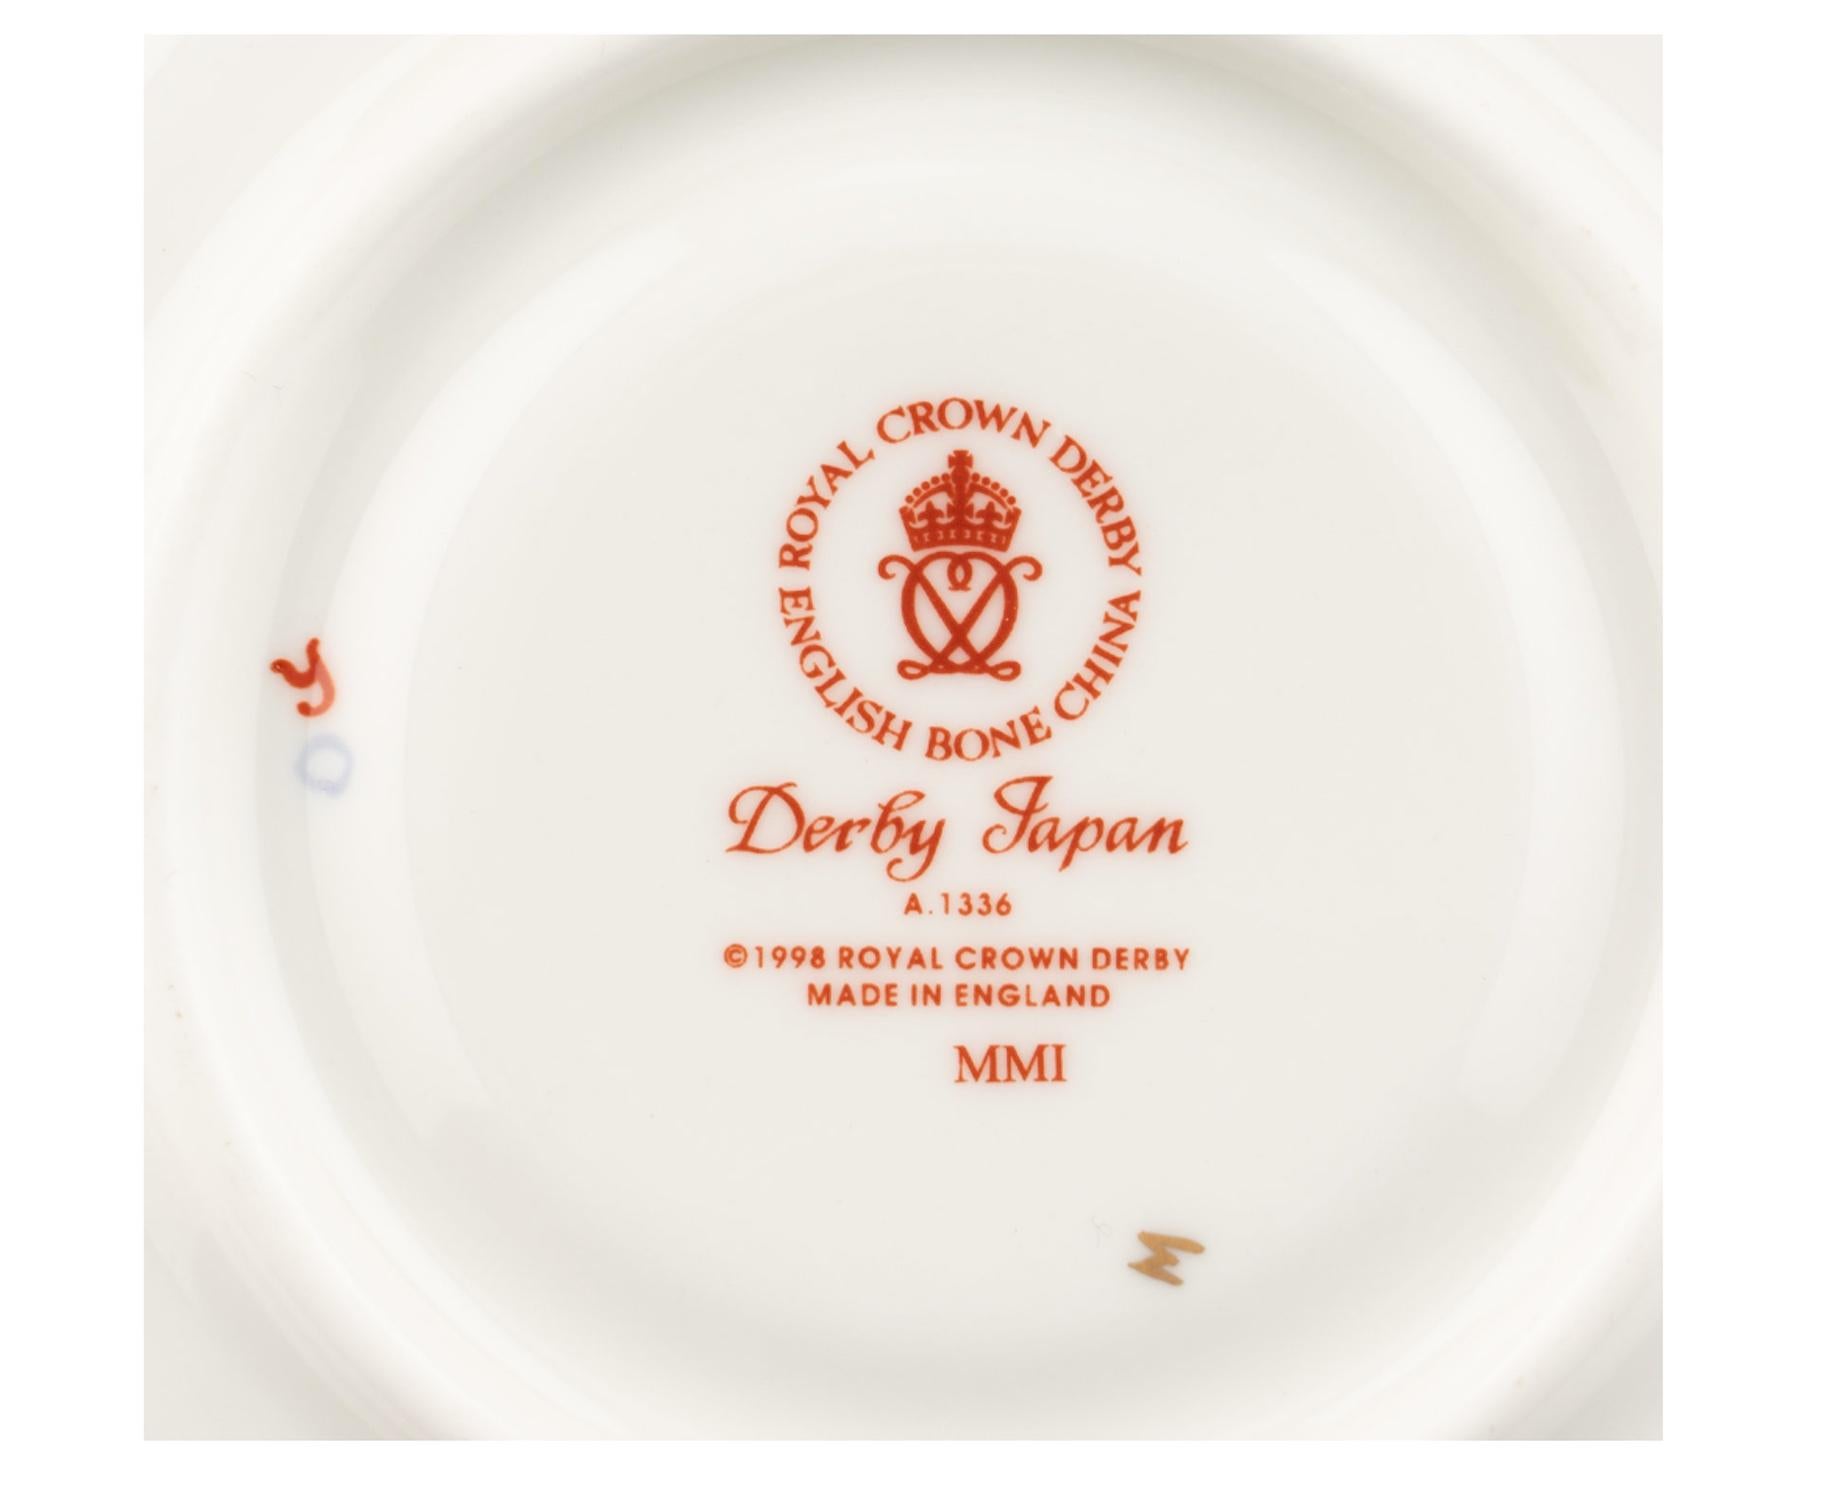 A Royal Crown Derby Porcelain/ironstone Assembled Dinner Service
19th/20th Century
Kings pattern, in slight variations throughout, comprising:
12 dinner plates
11 luncheon plates
12 salad plates (shaped rim)
6 bread plates
10 footed cups
10